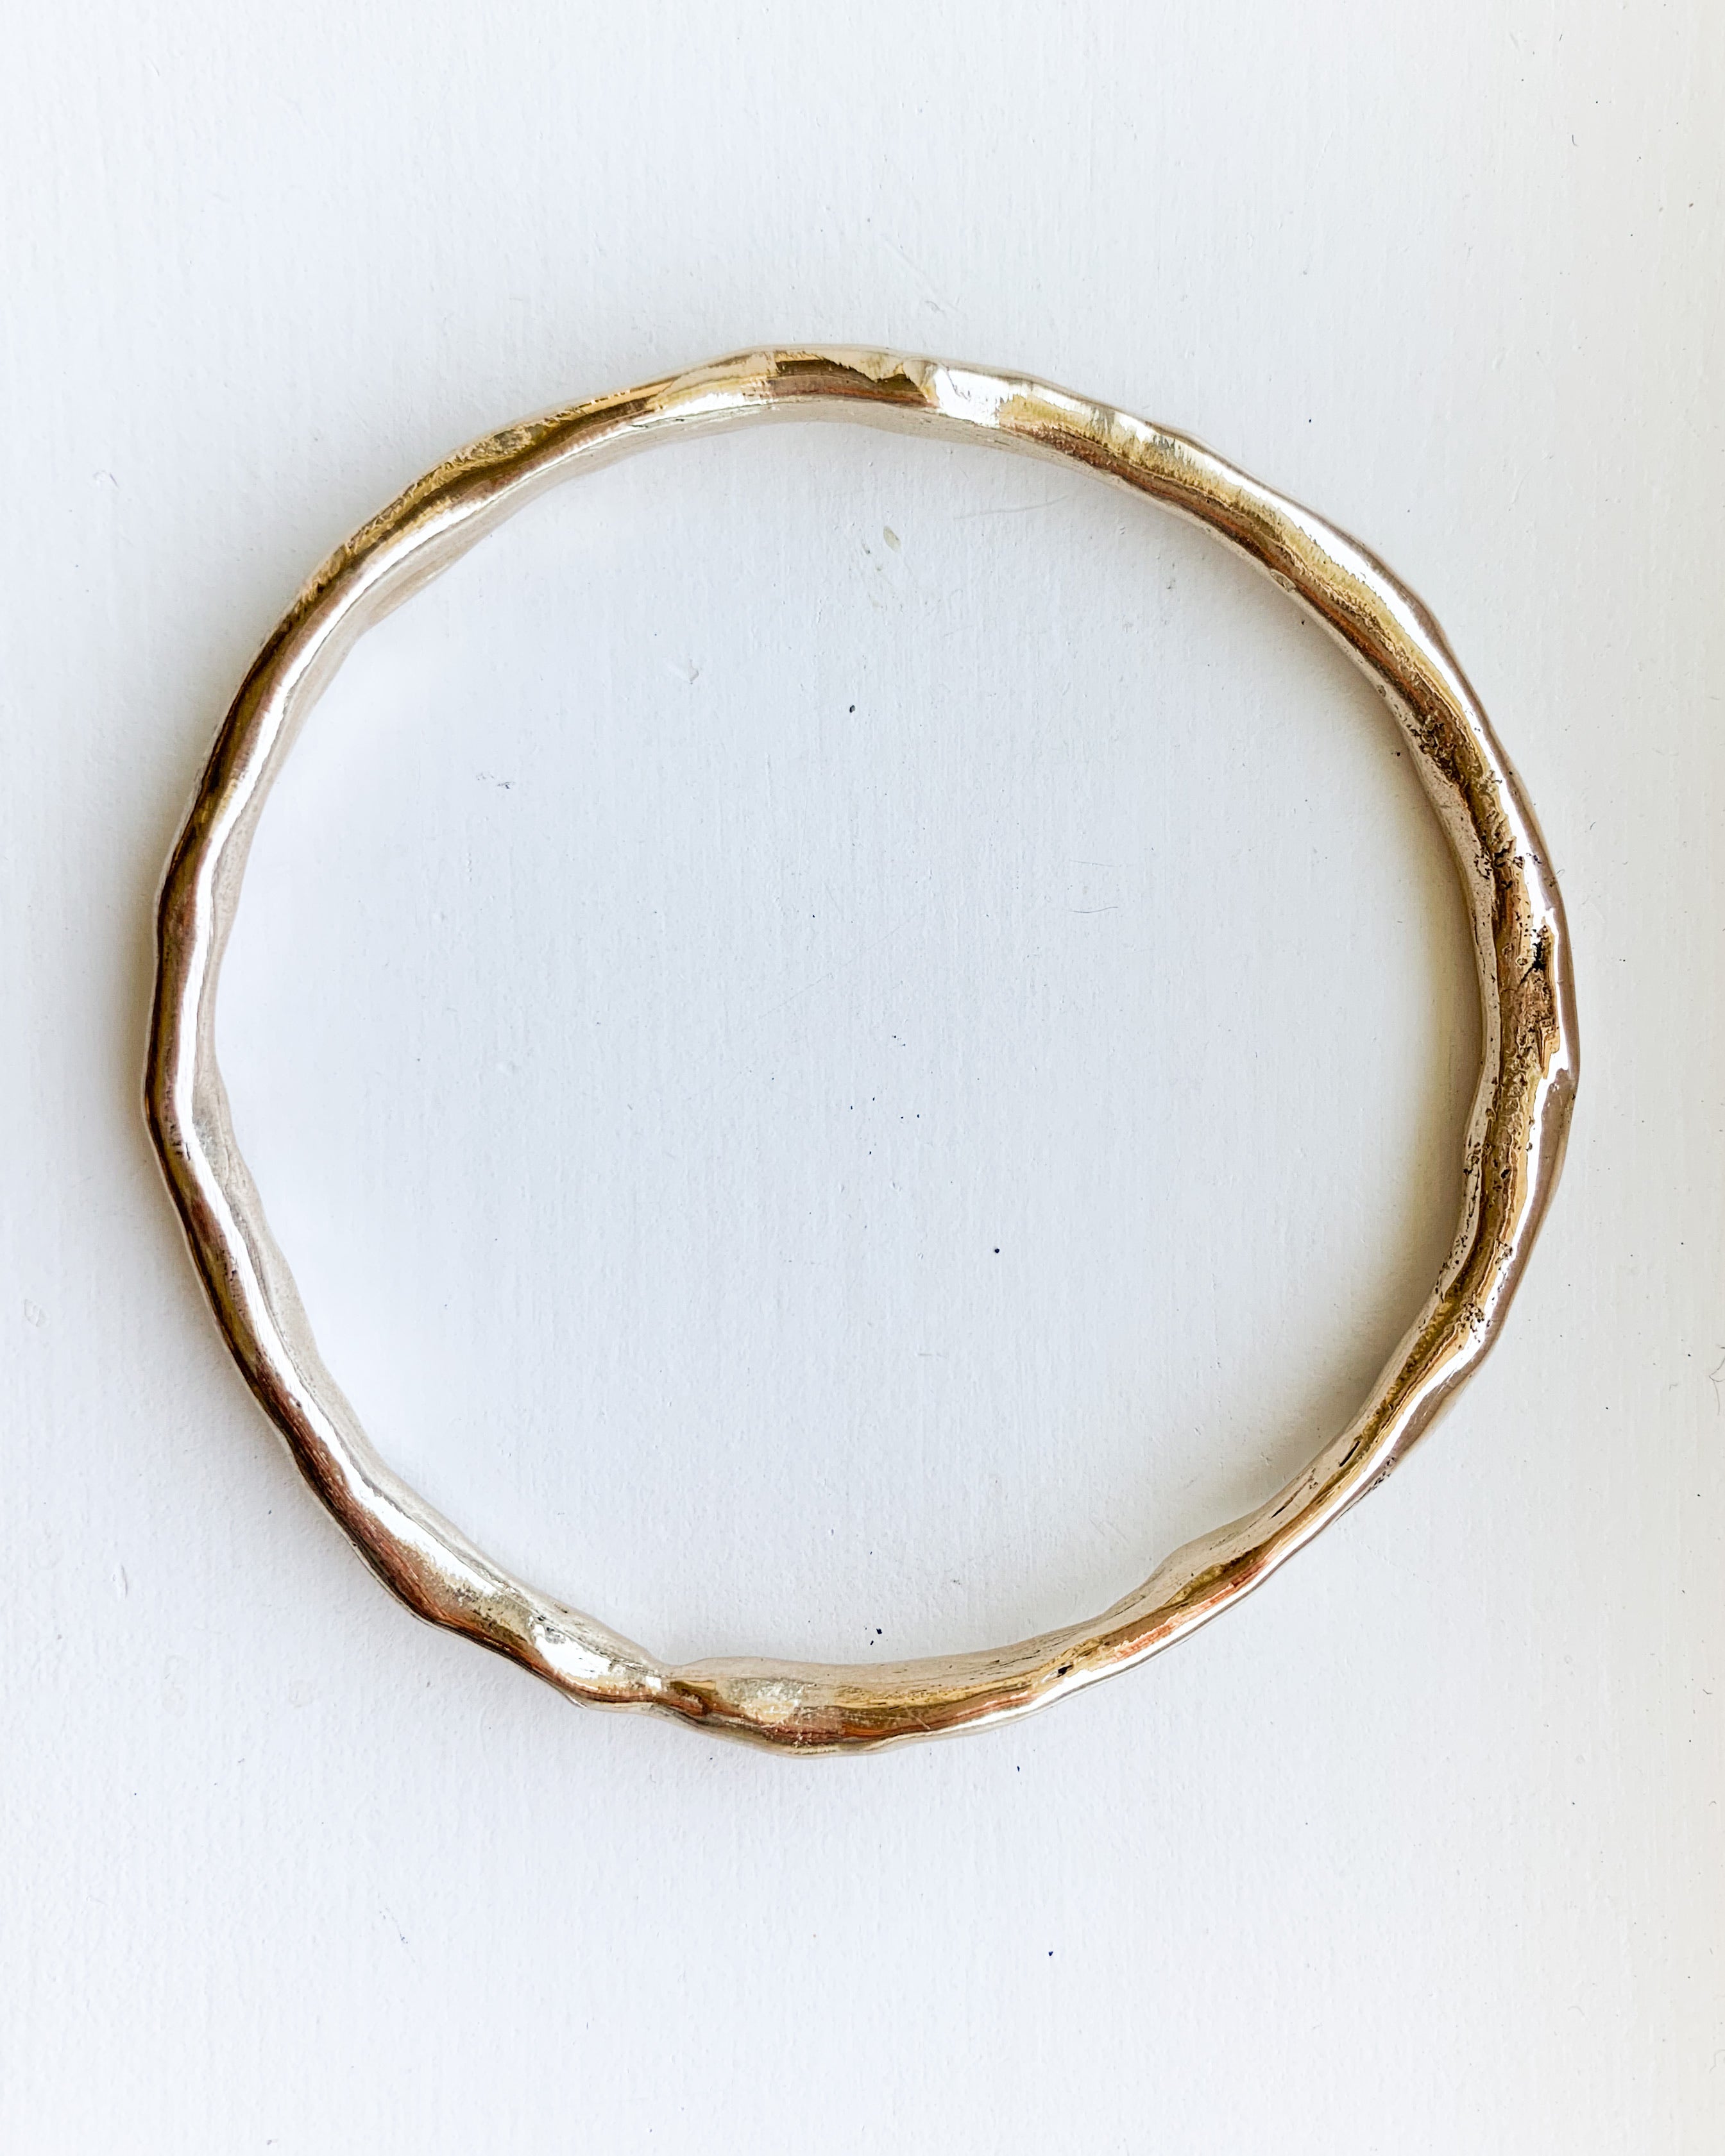 a hand formed bronze bangle bracelet shown on a white background